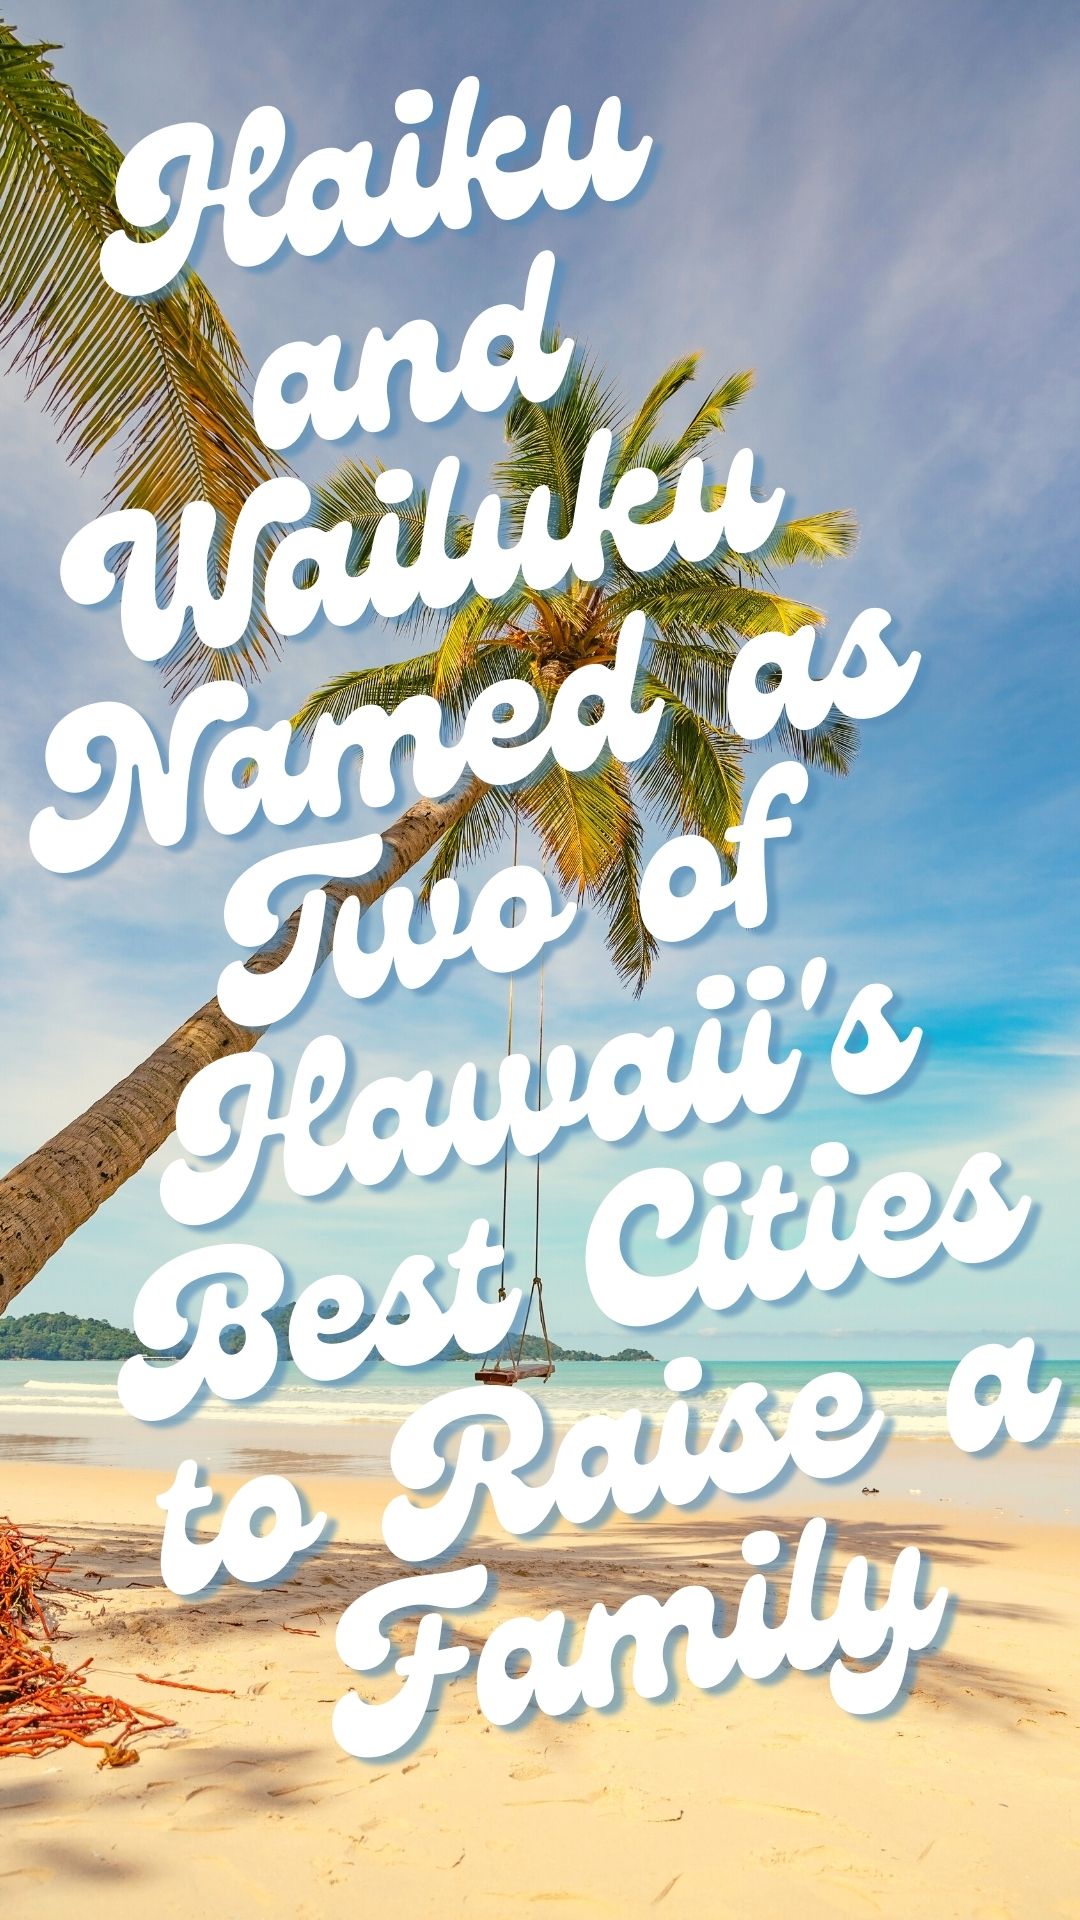 Haiku and Wailuku Named as Two of Hawaii's Best Cities to Raise a Family